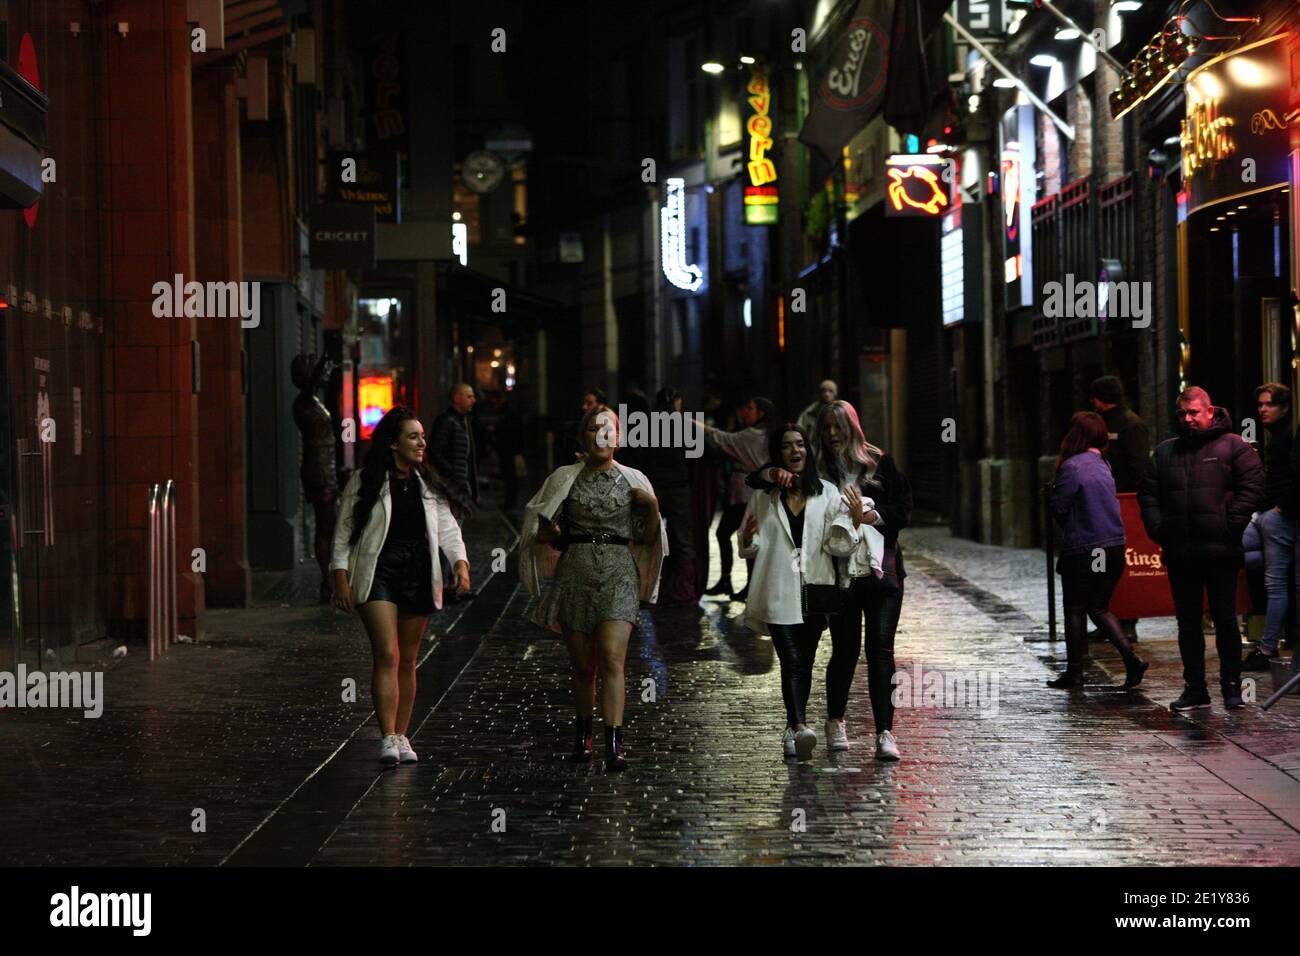 Liverpool, UK - October 10 2020: Mathew Street in Liverpool on the last weekend before stricter lockdown measures are expected across the north. Stock Photo